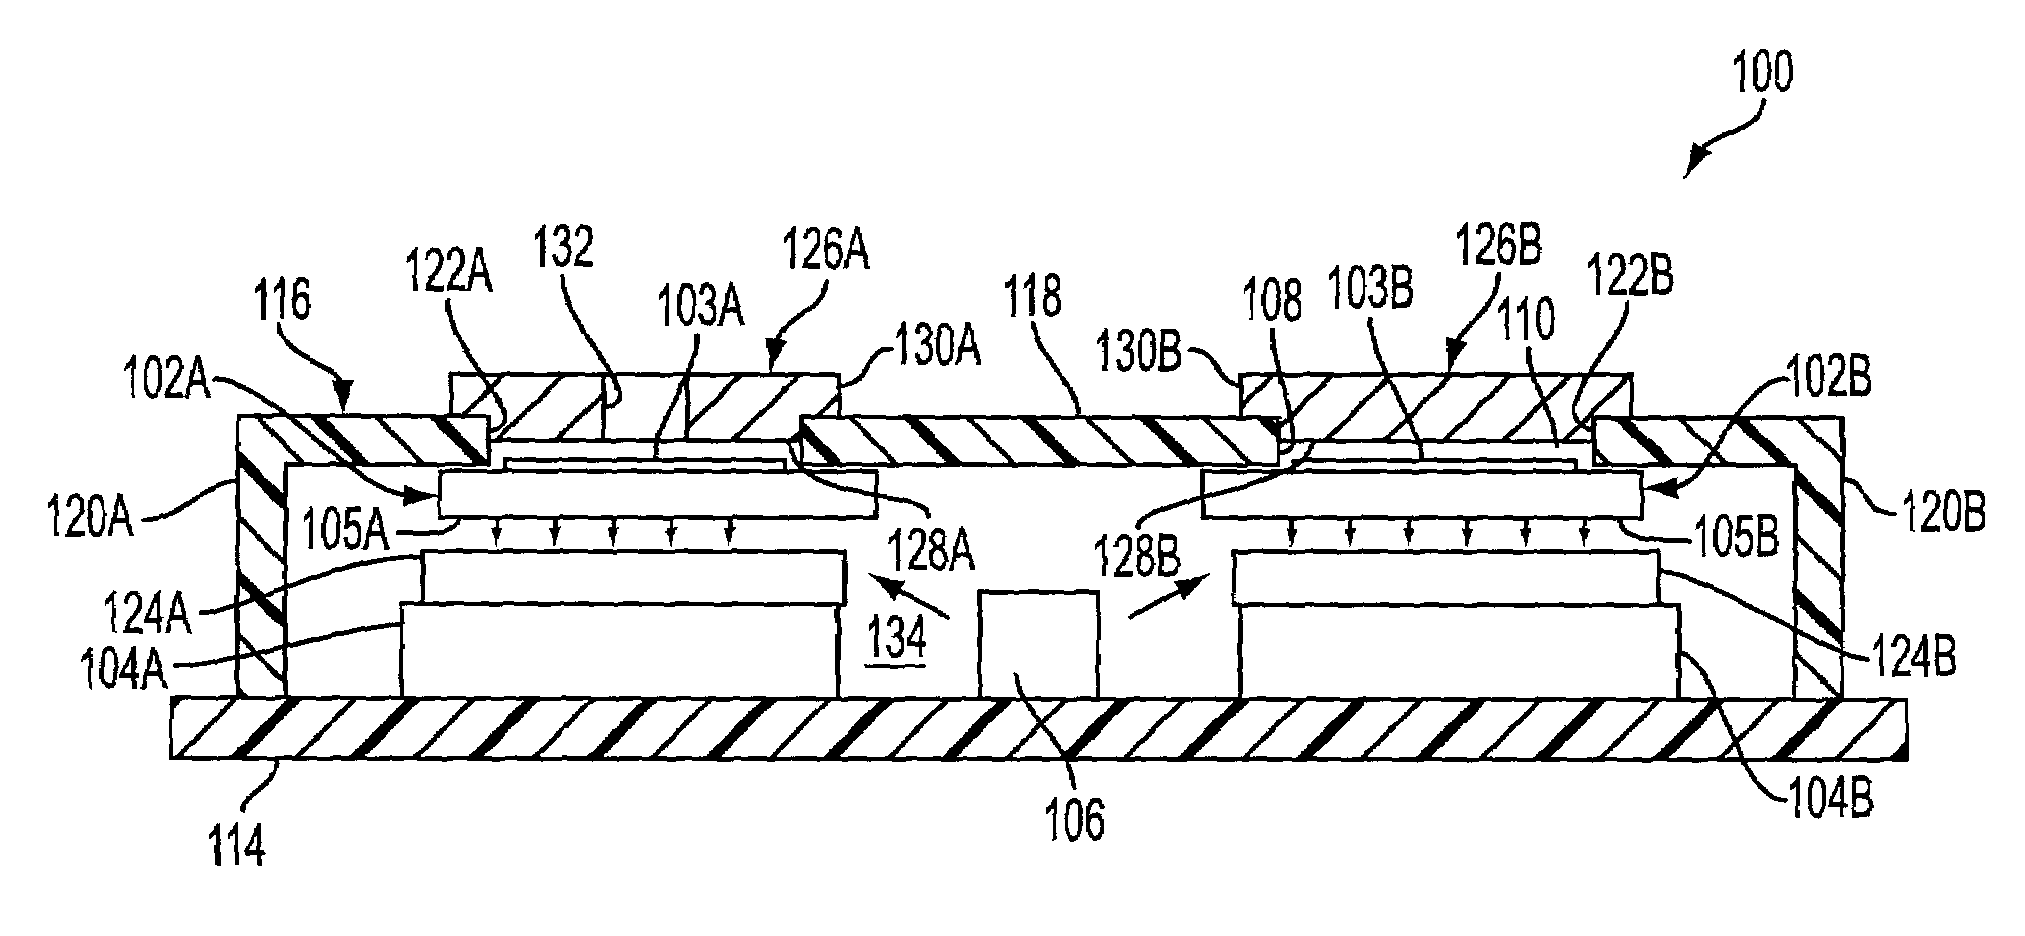 Electro-optical sensing device with reference channel